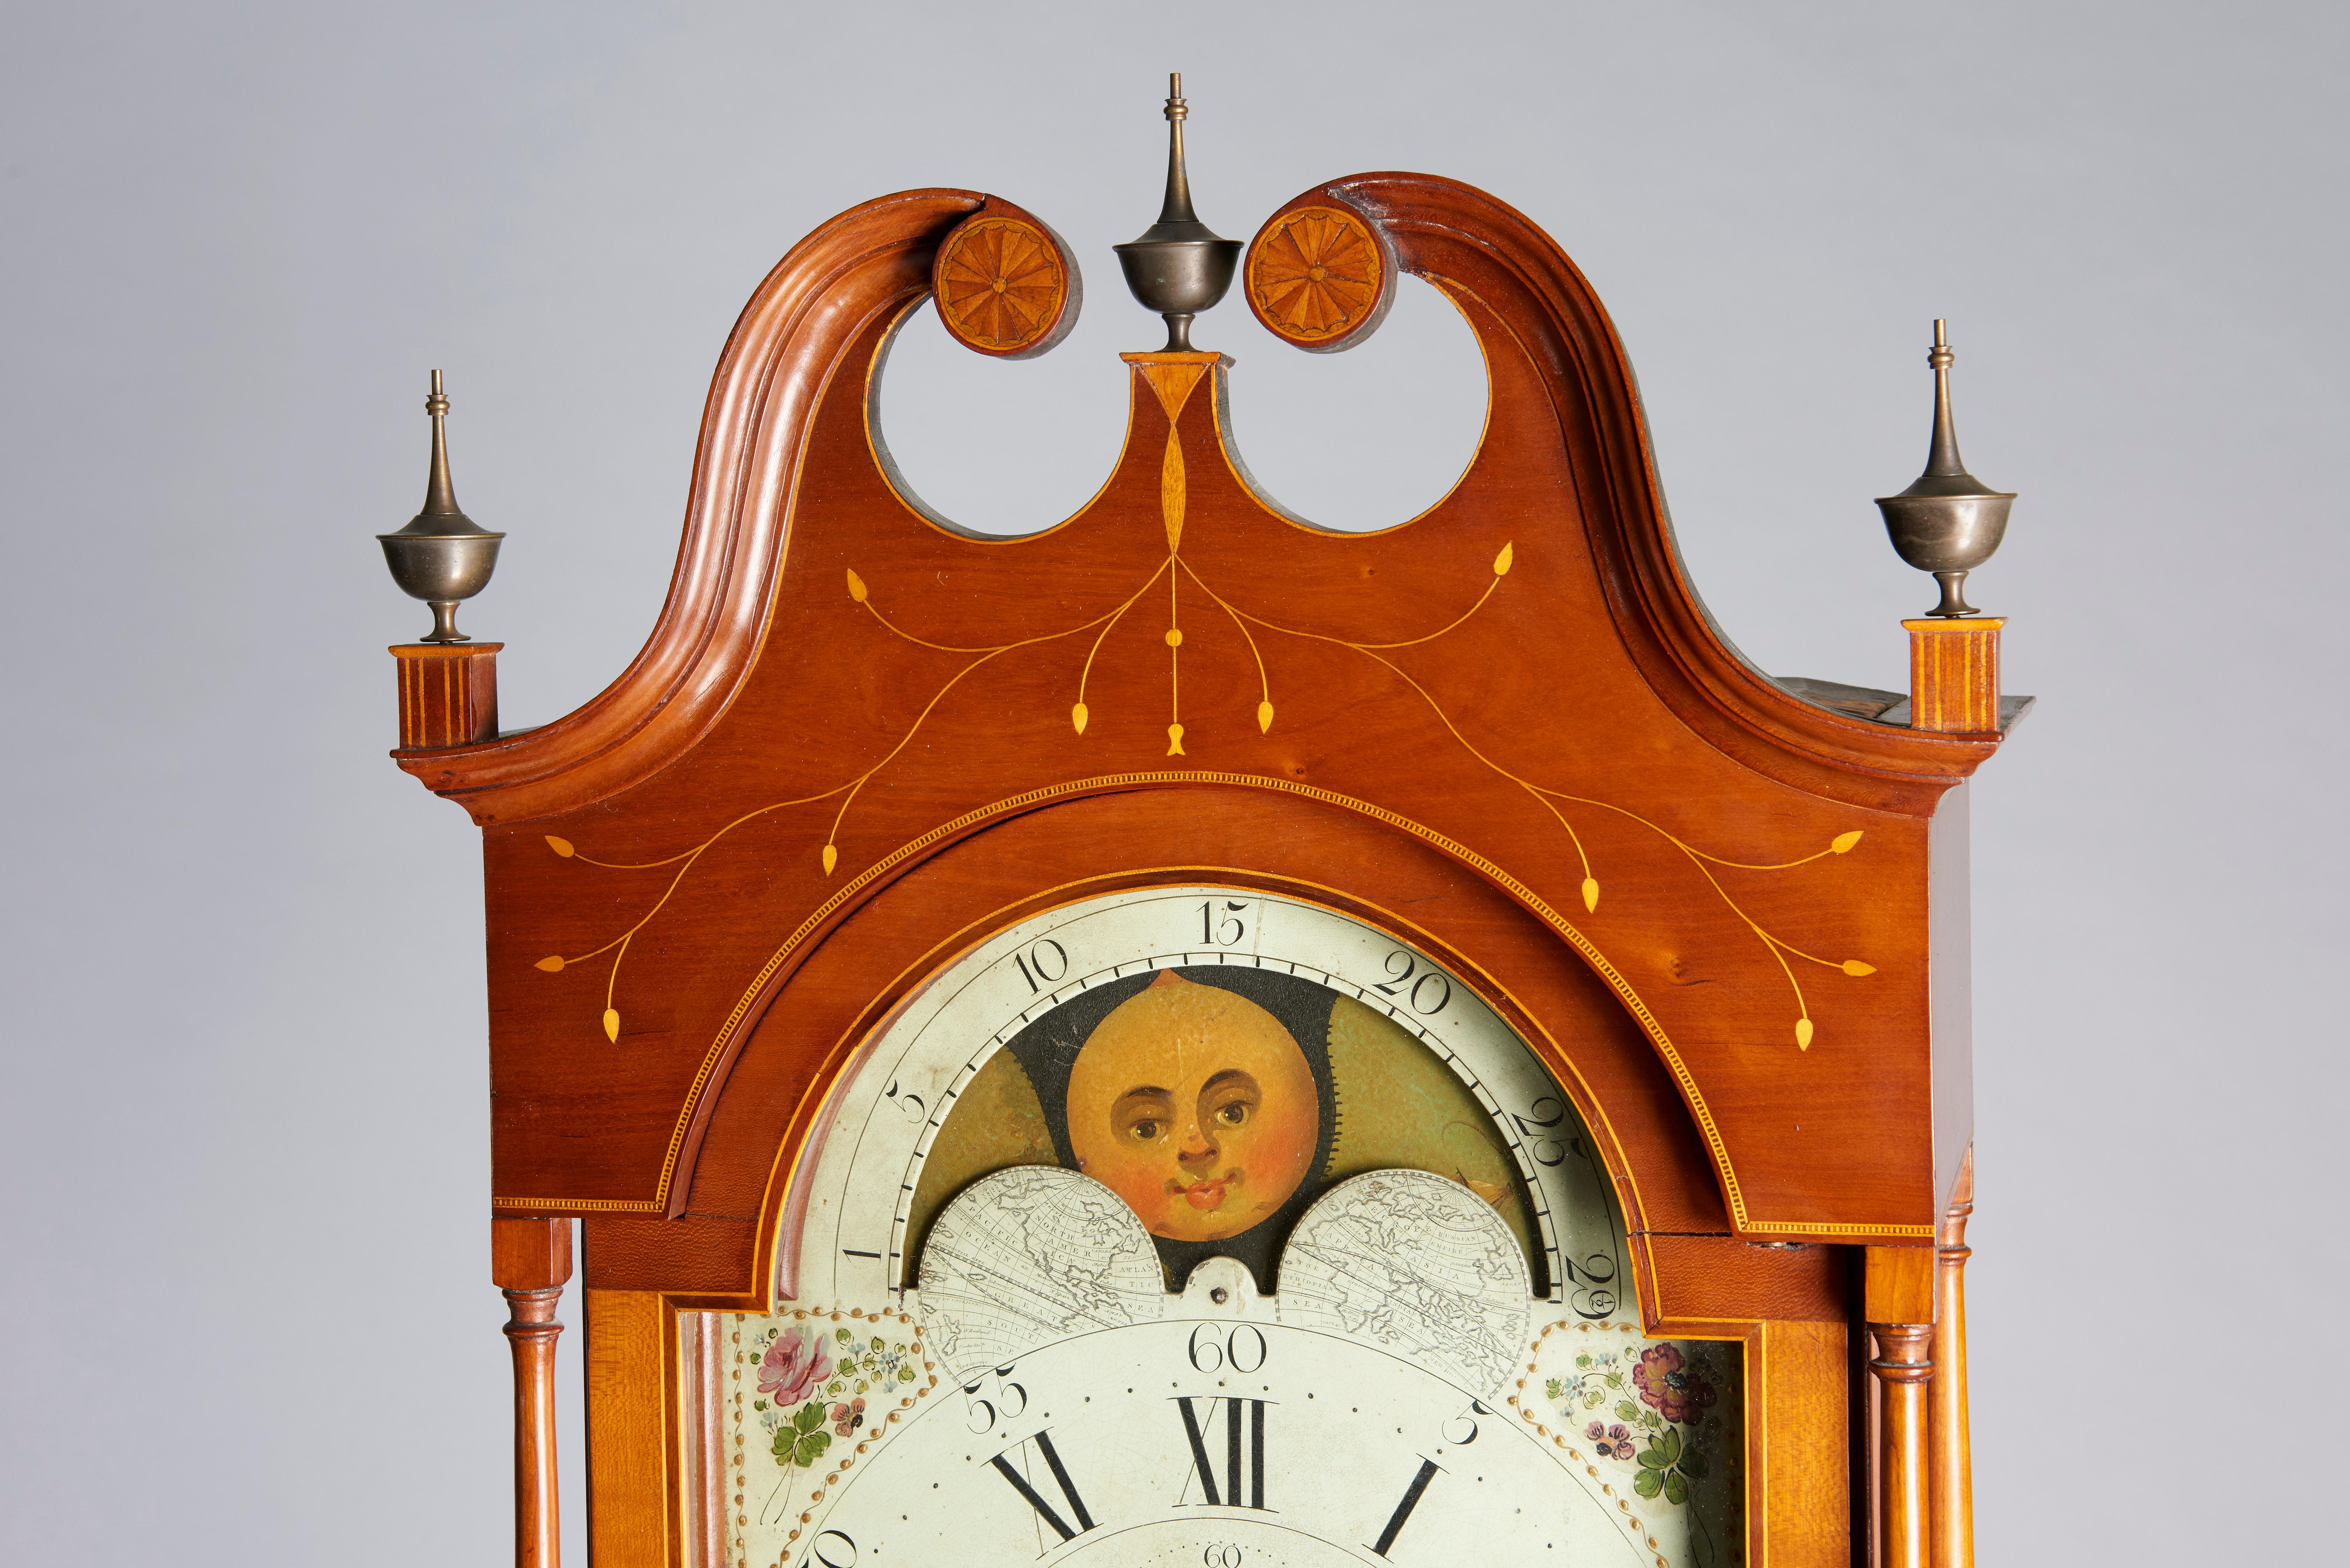 A nice small sized clock with original and exceptional inlay including a vine and berry design, a spreadwing eagle, and a beautifully rendered swan above a swirling shell pattern on the base. Lovely mellowed cherry color.